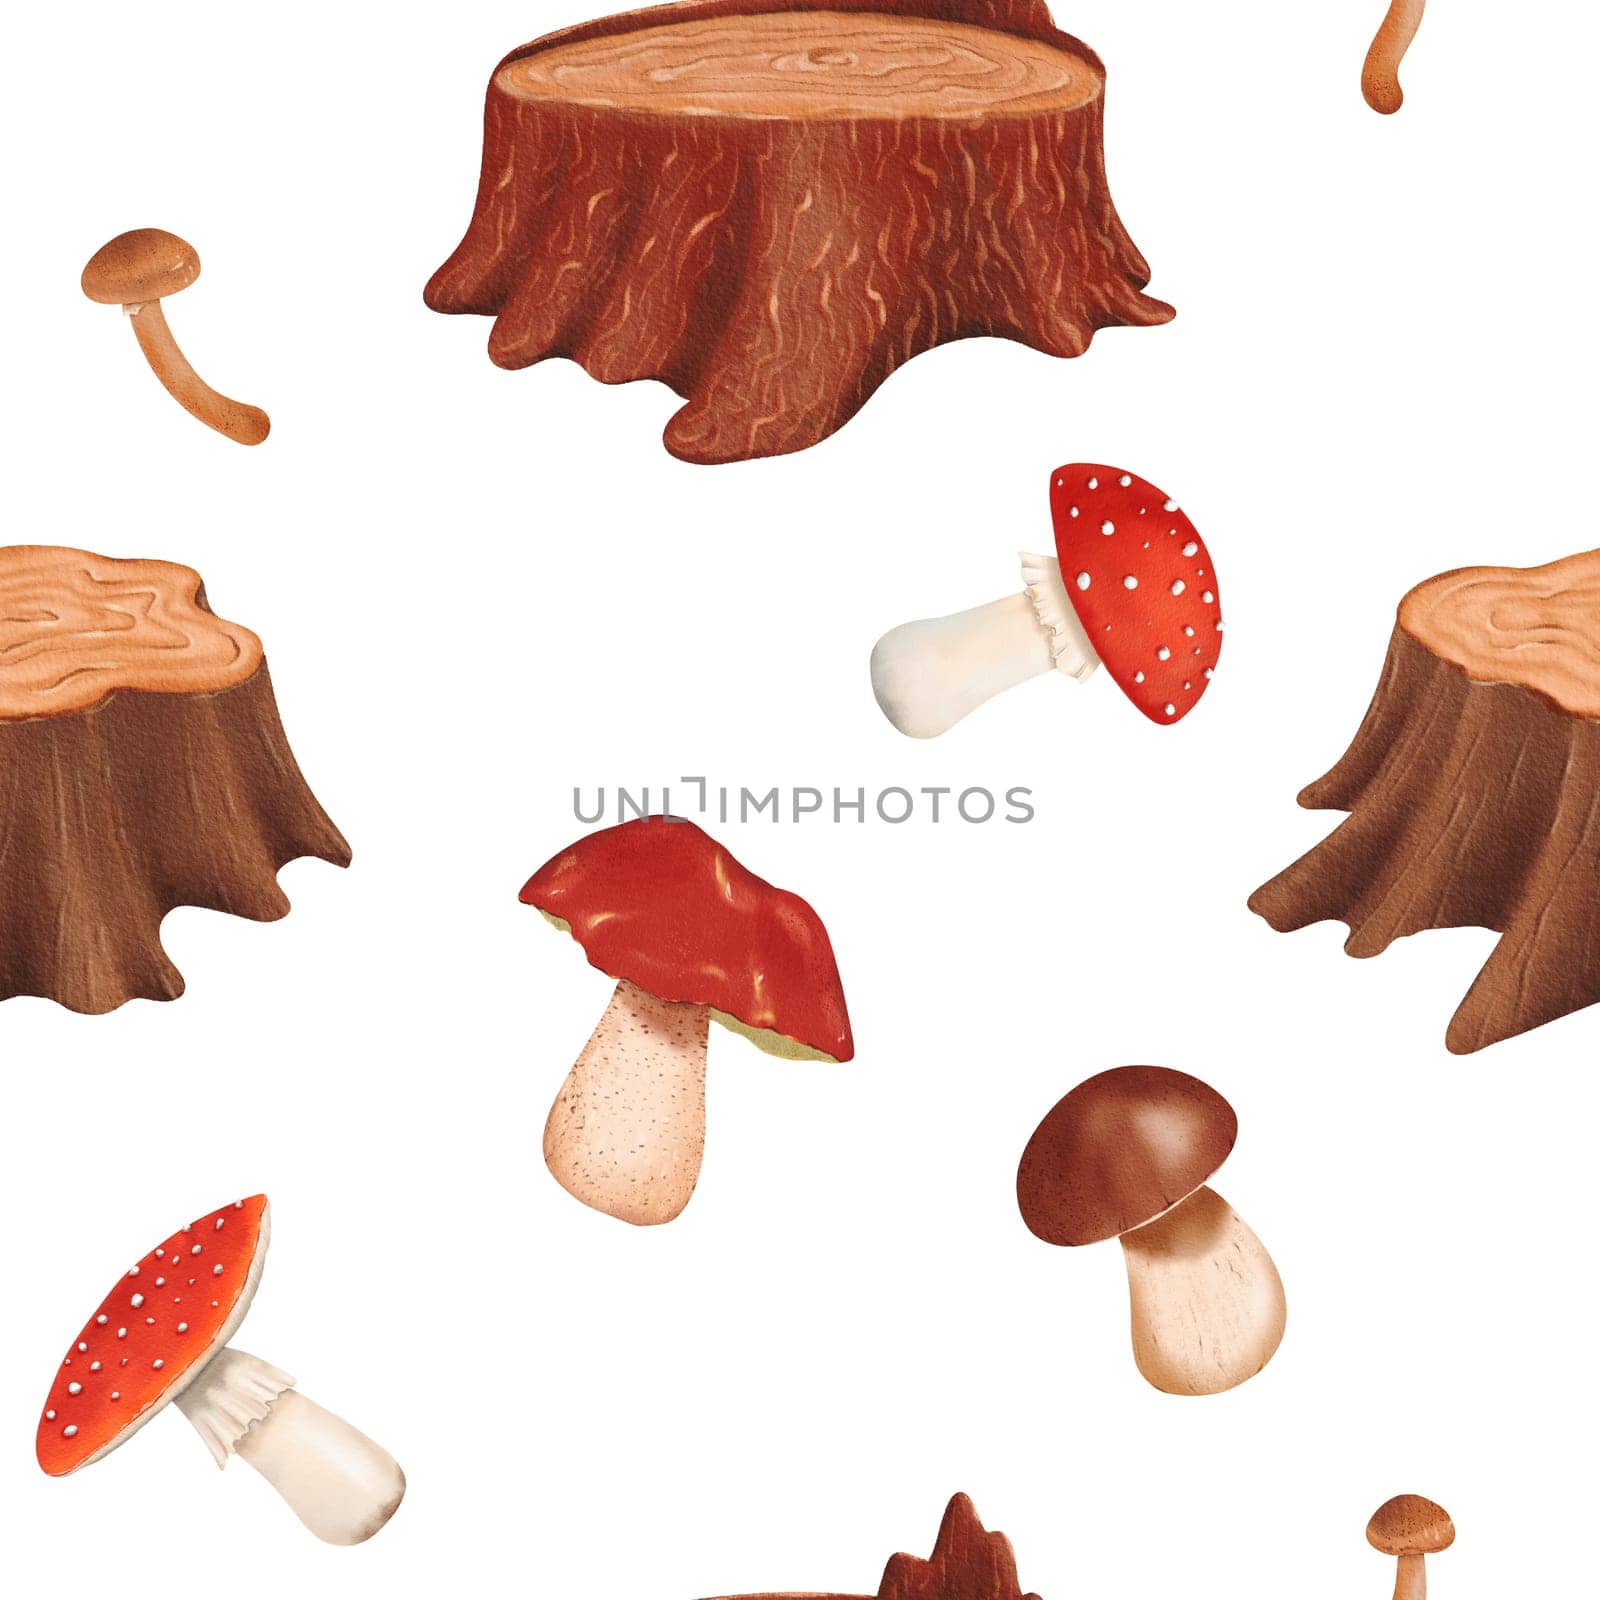 Woodland seamless pattern featuring aged textured tree stumps and various mushrooms. Edible penny bun and delicious porcini mushrooms. Dangerous poisonous fly agaric. Autumnal watercolor illustration.